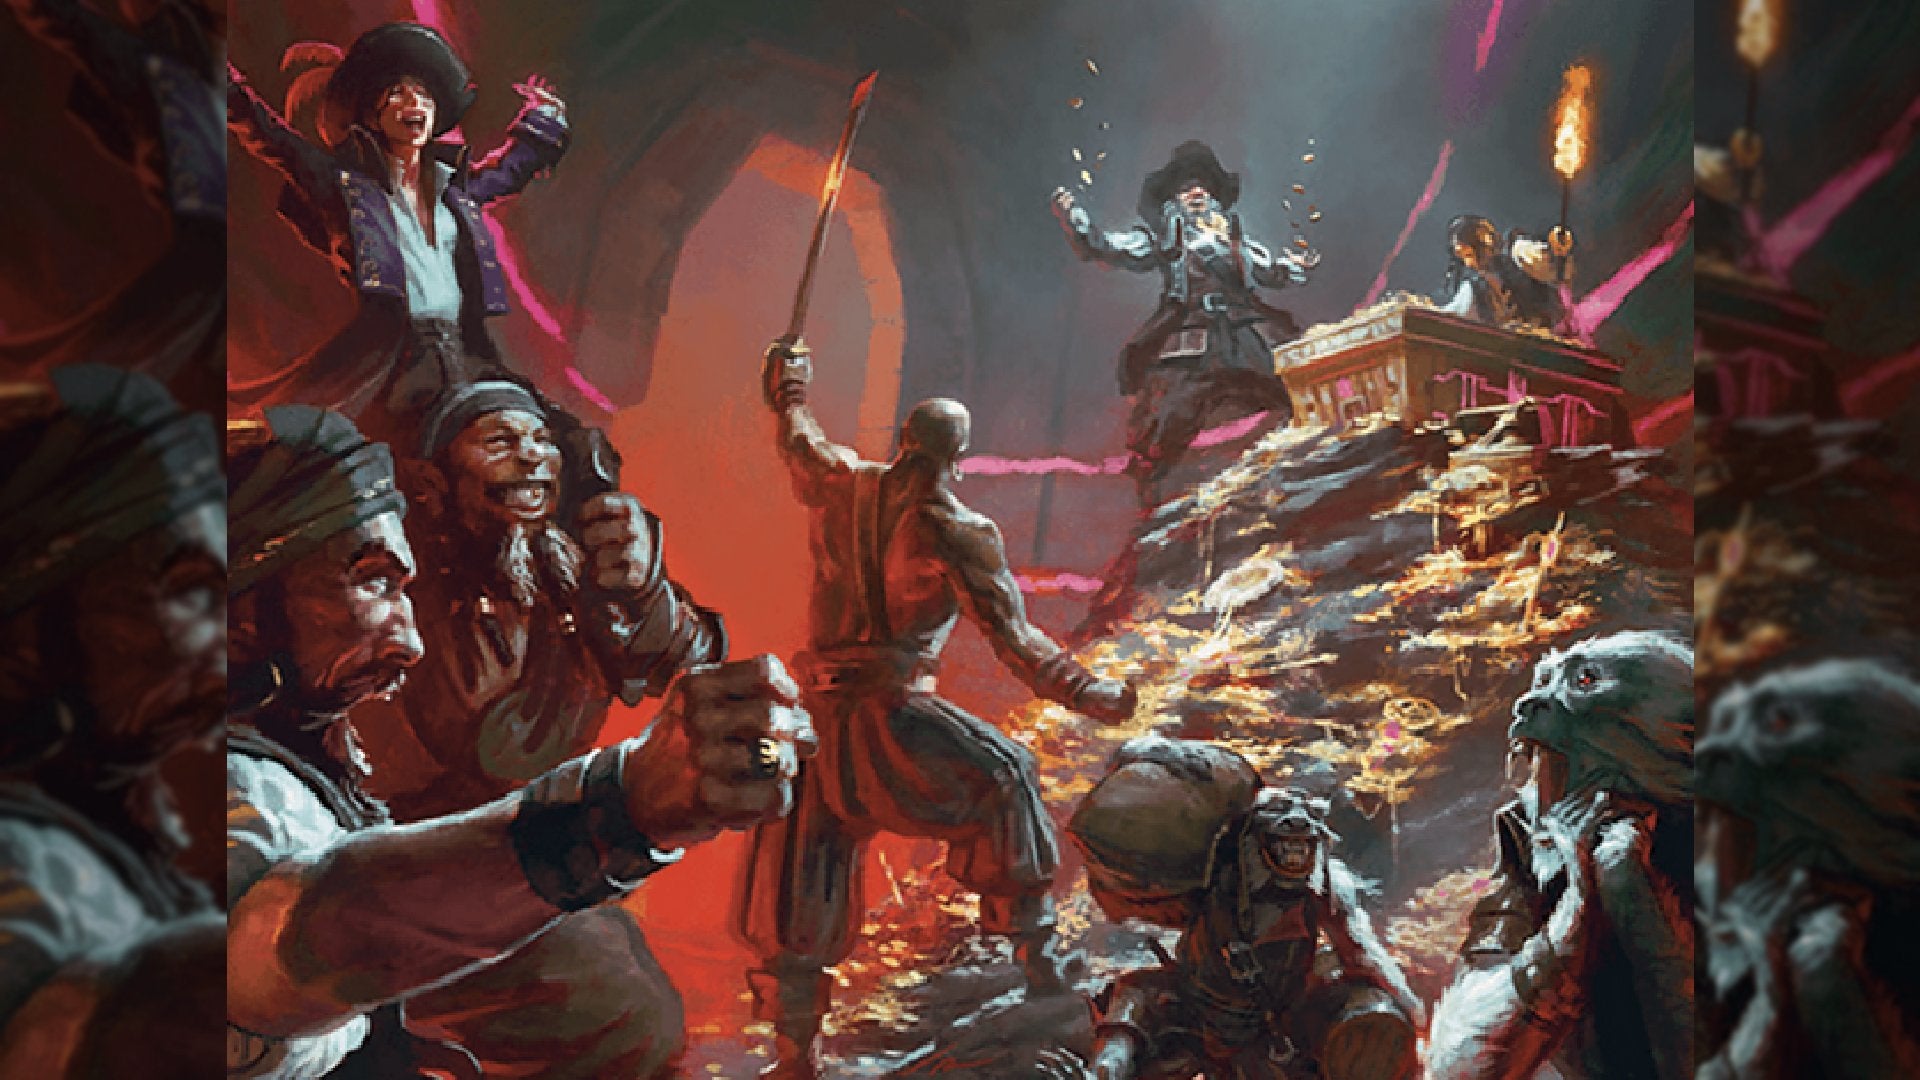 Pirates finding a hoard of treasure on an MTG card's artwork.